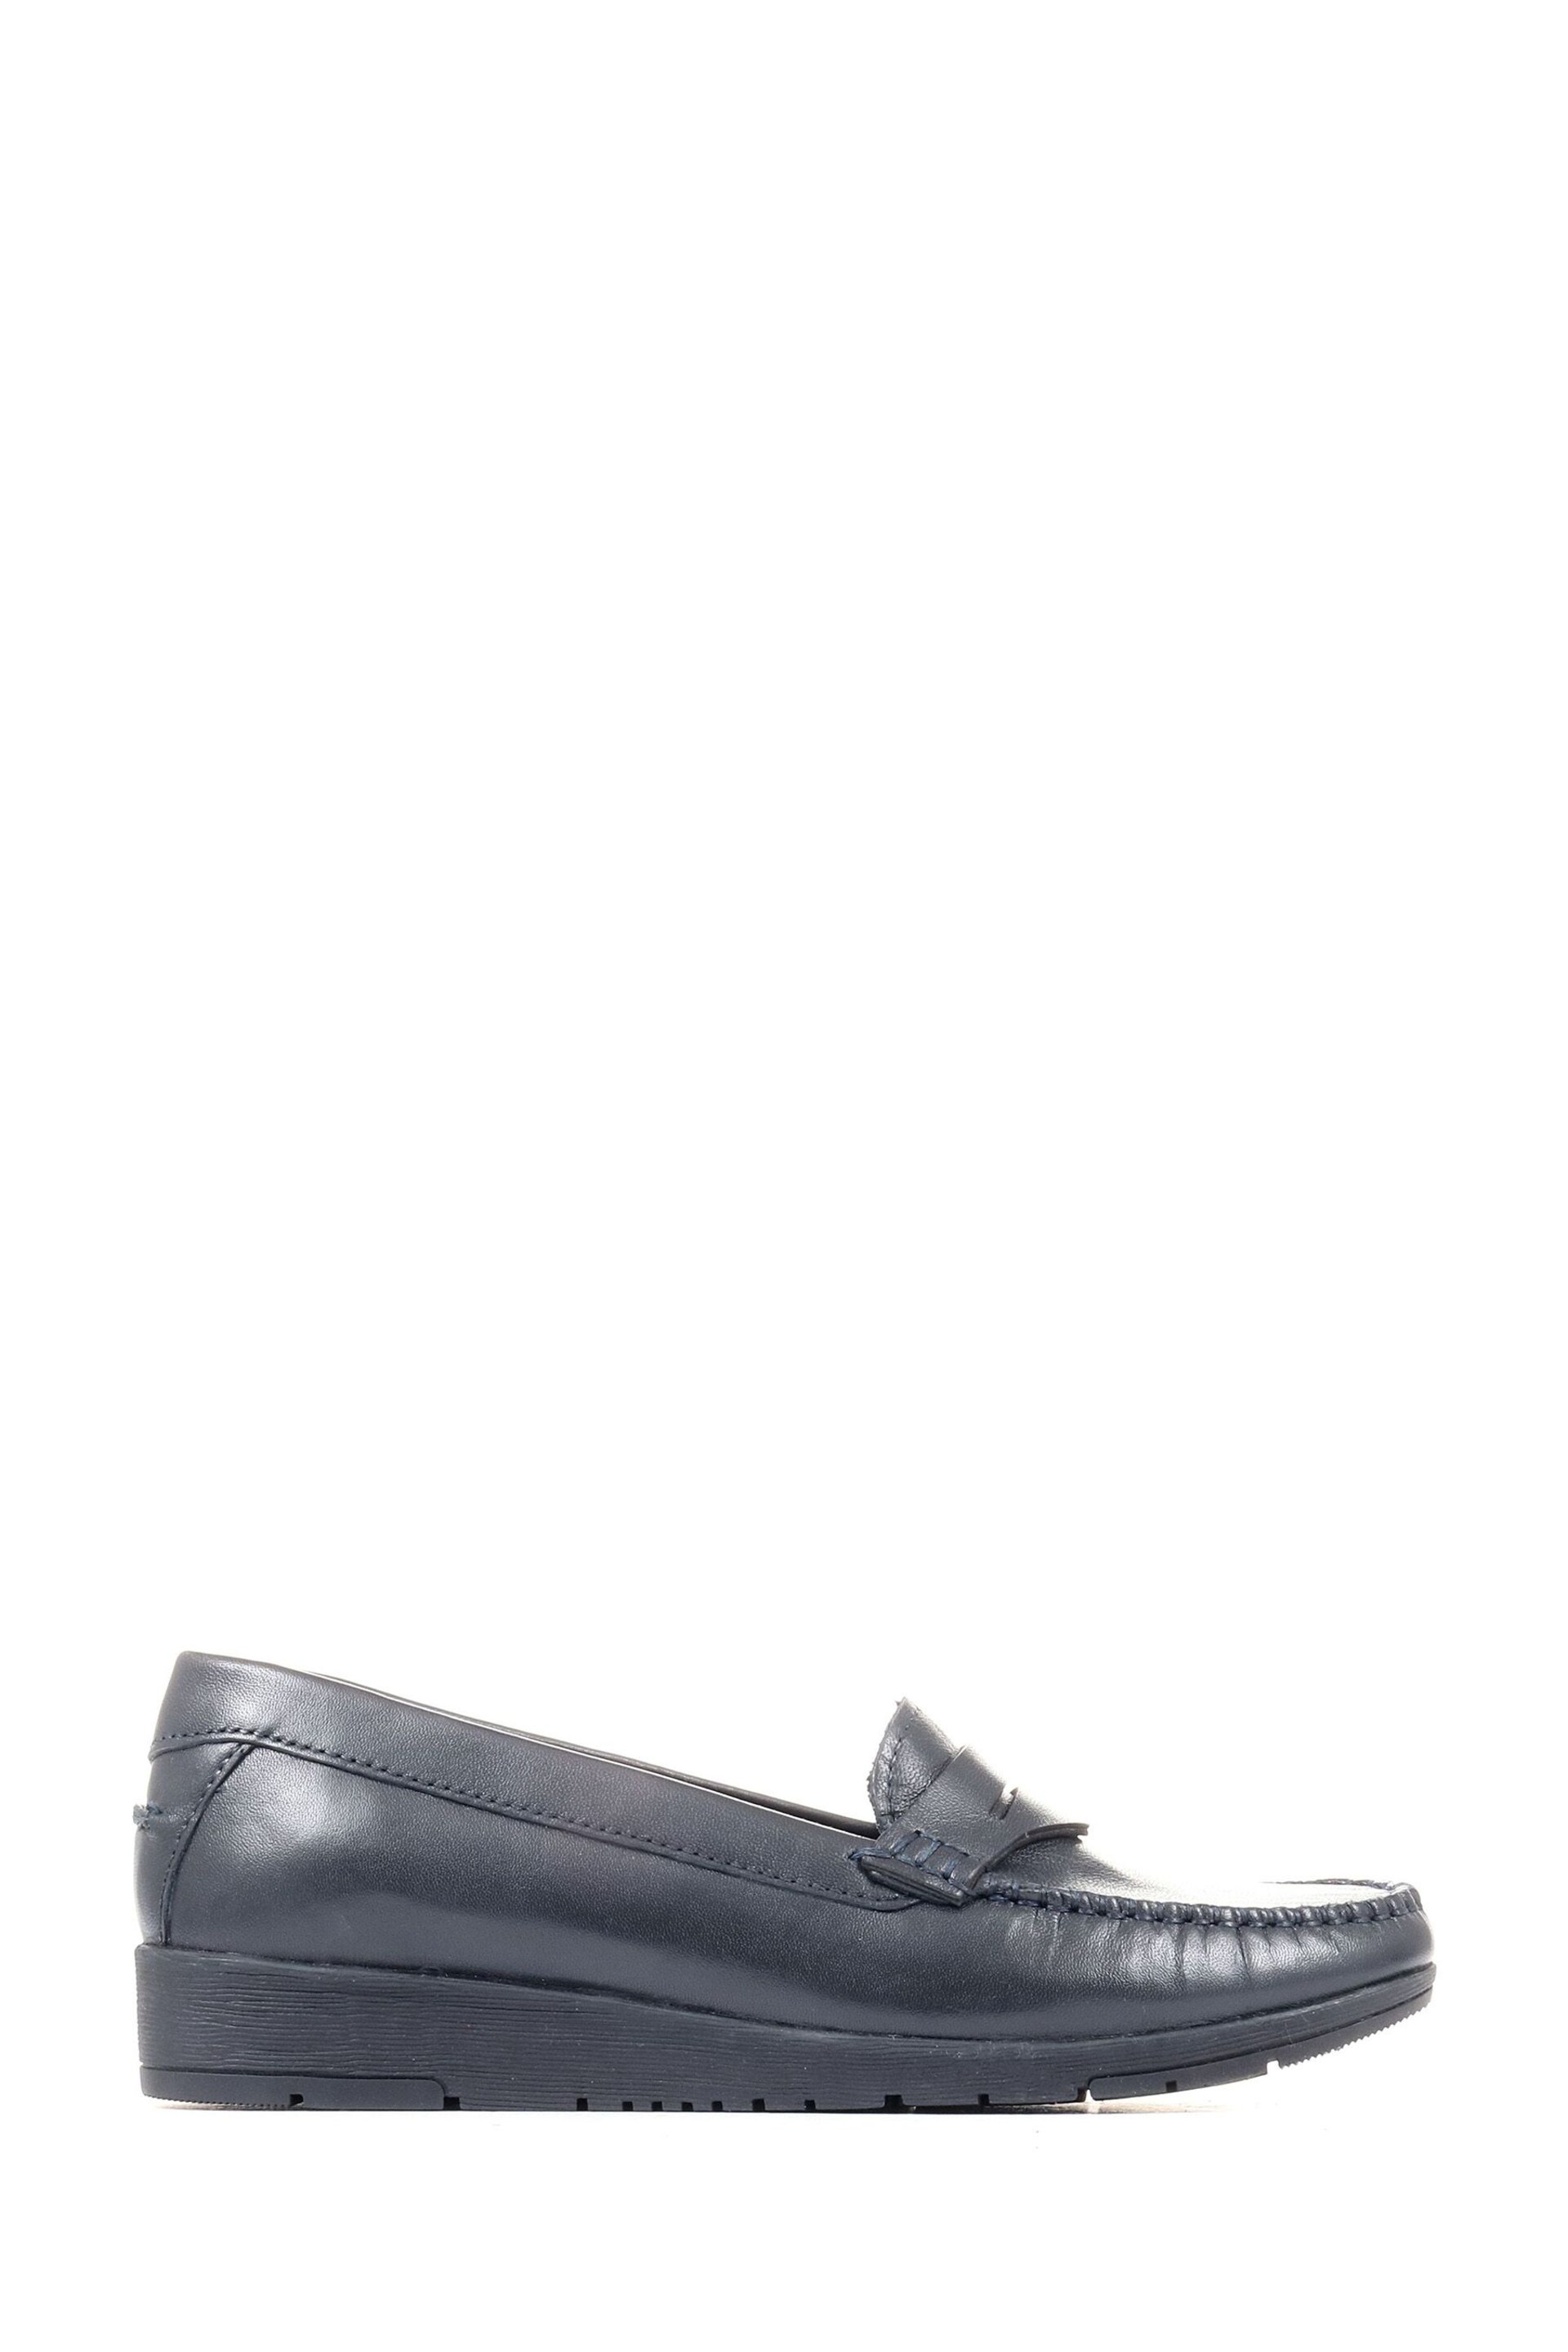 Pavers Blue Wide Fit Leather Penny Loafers - Image 1 of 7